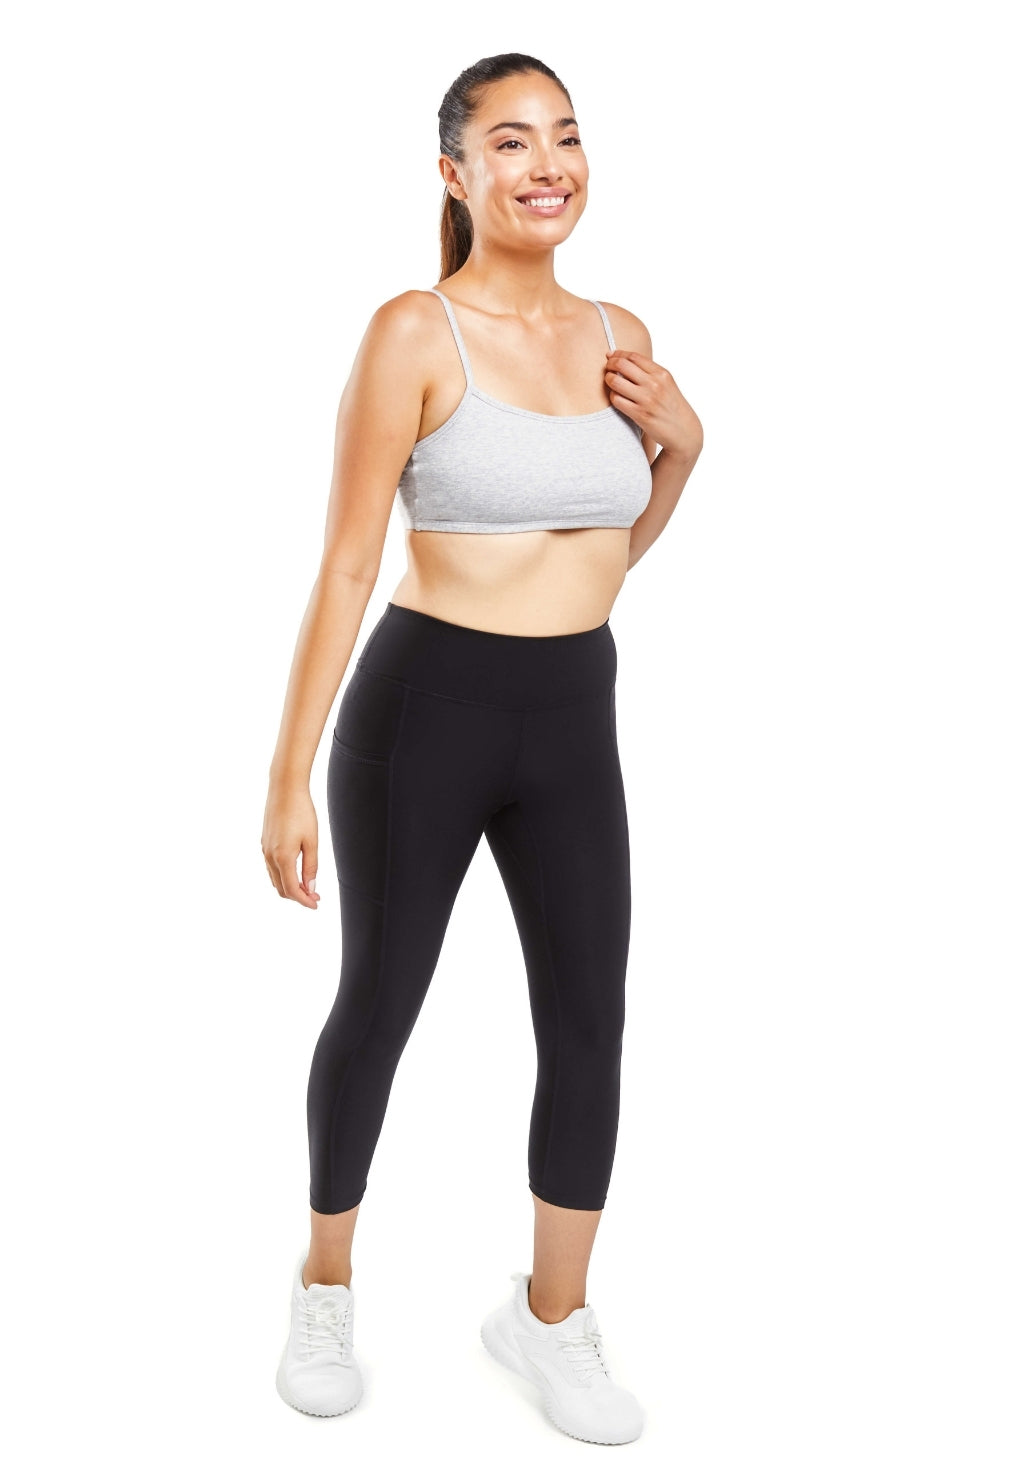 Body Sculpt Leggings (with Therma Lining) - Sweat Like this fitness